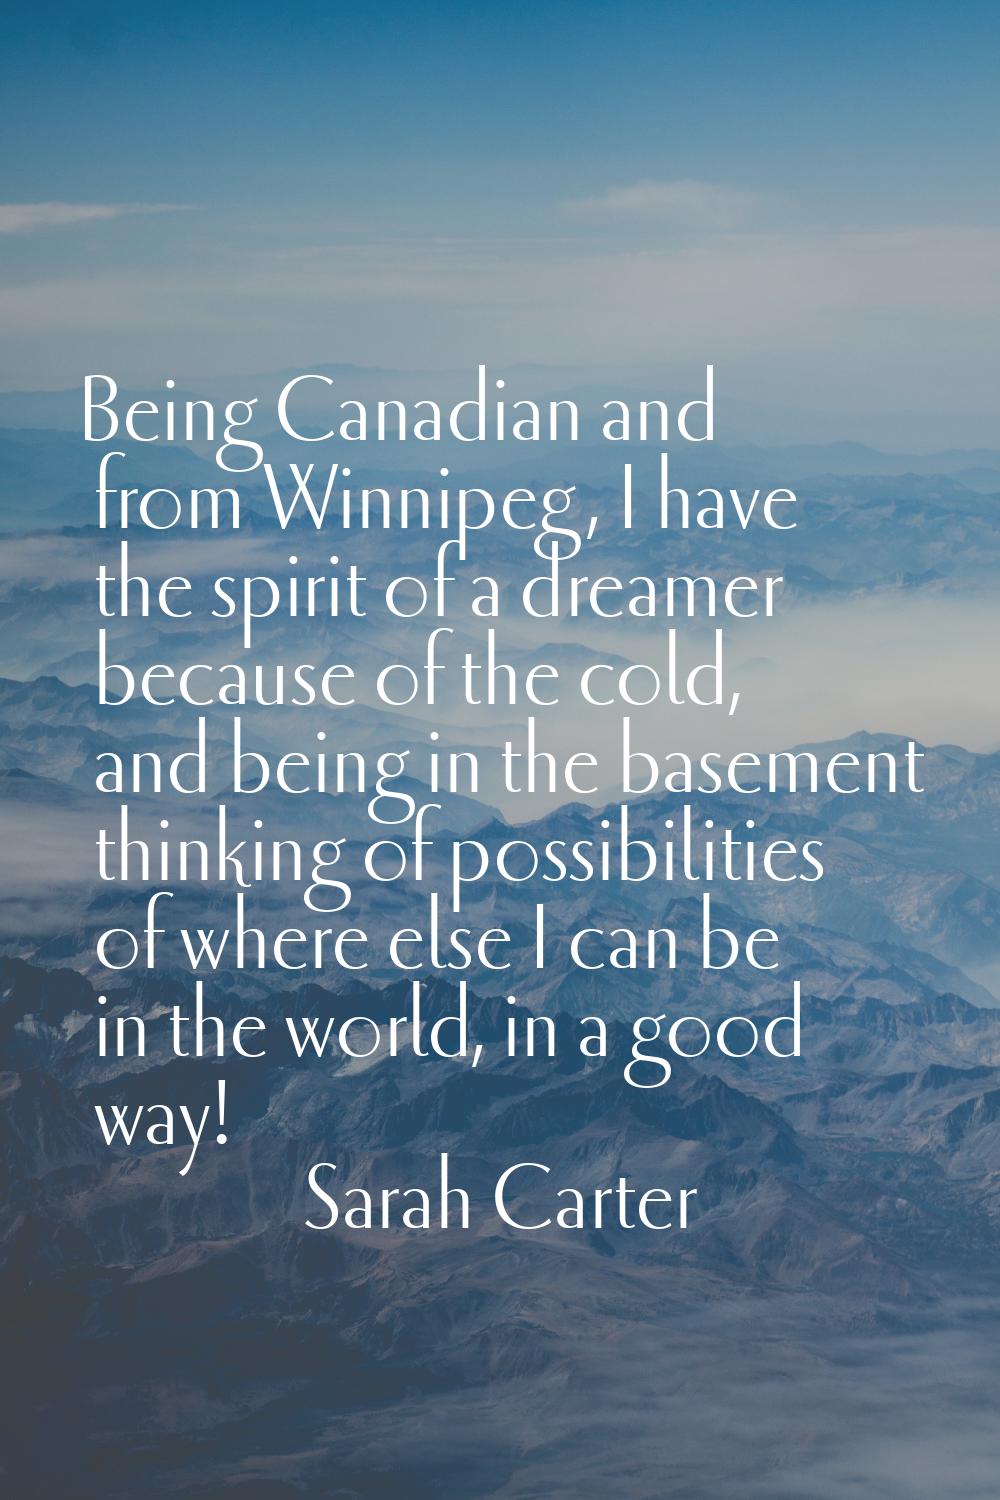 Being Canadian and from Winnipeg, I have the spirit of a dreamer because of the cold, and being in 